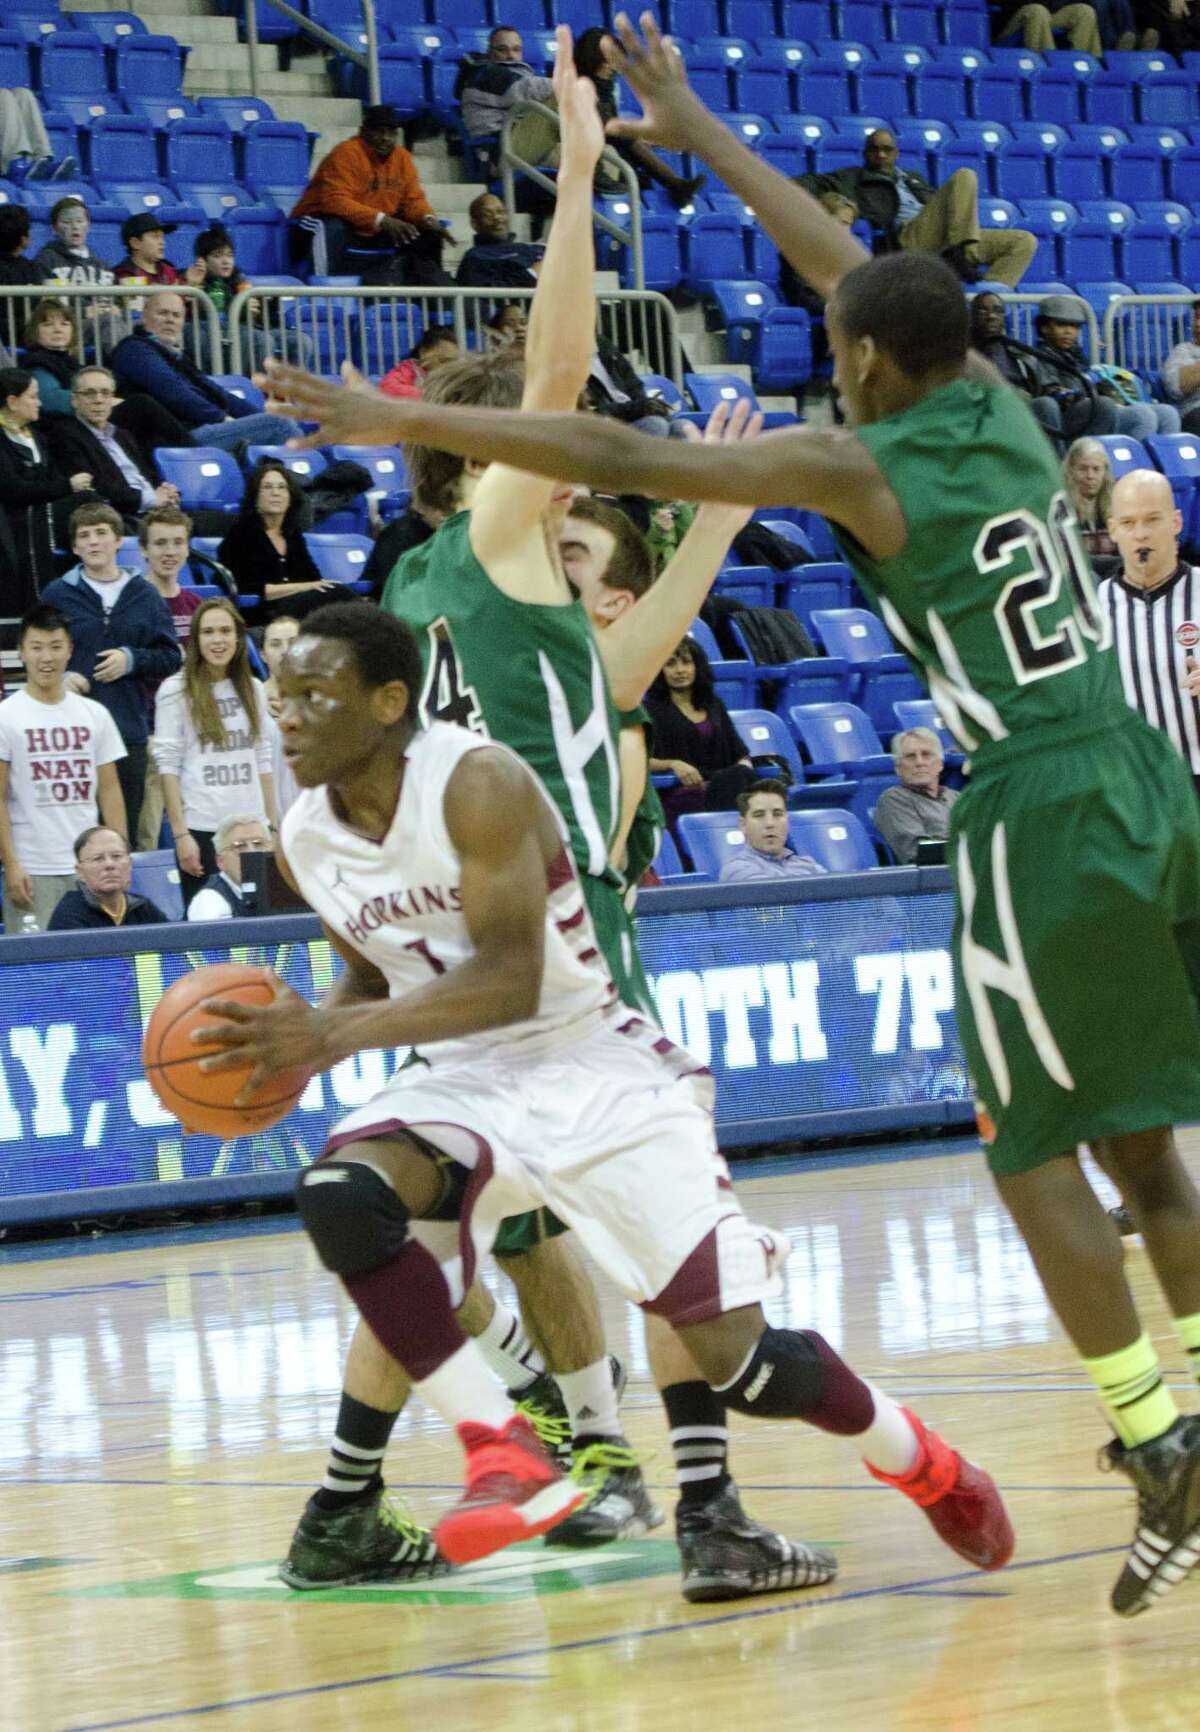 Kofi Adjepong (with ball) led Hopkins in scoring at 15.5 ppg. this season. (file photo)